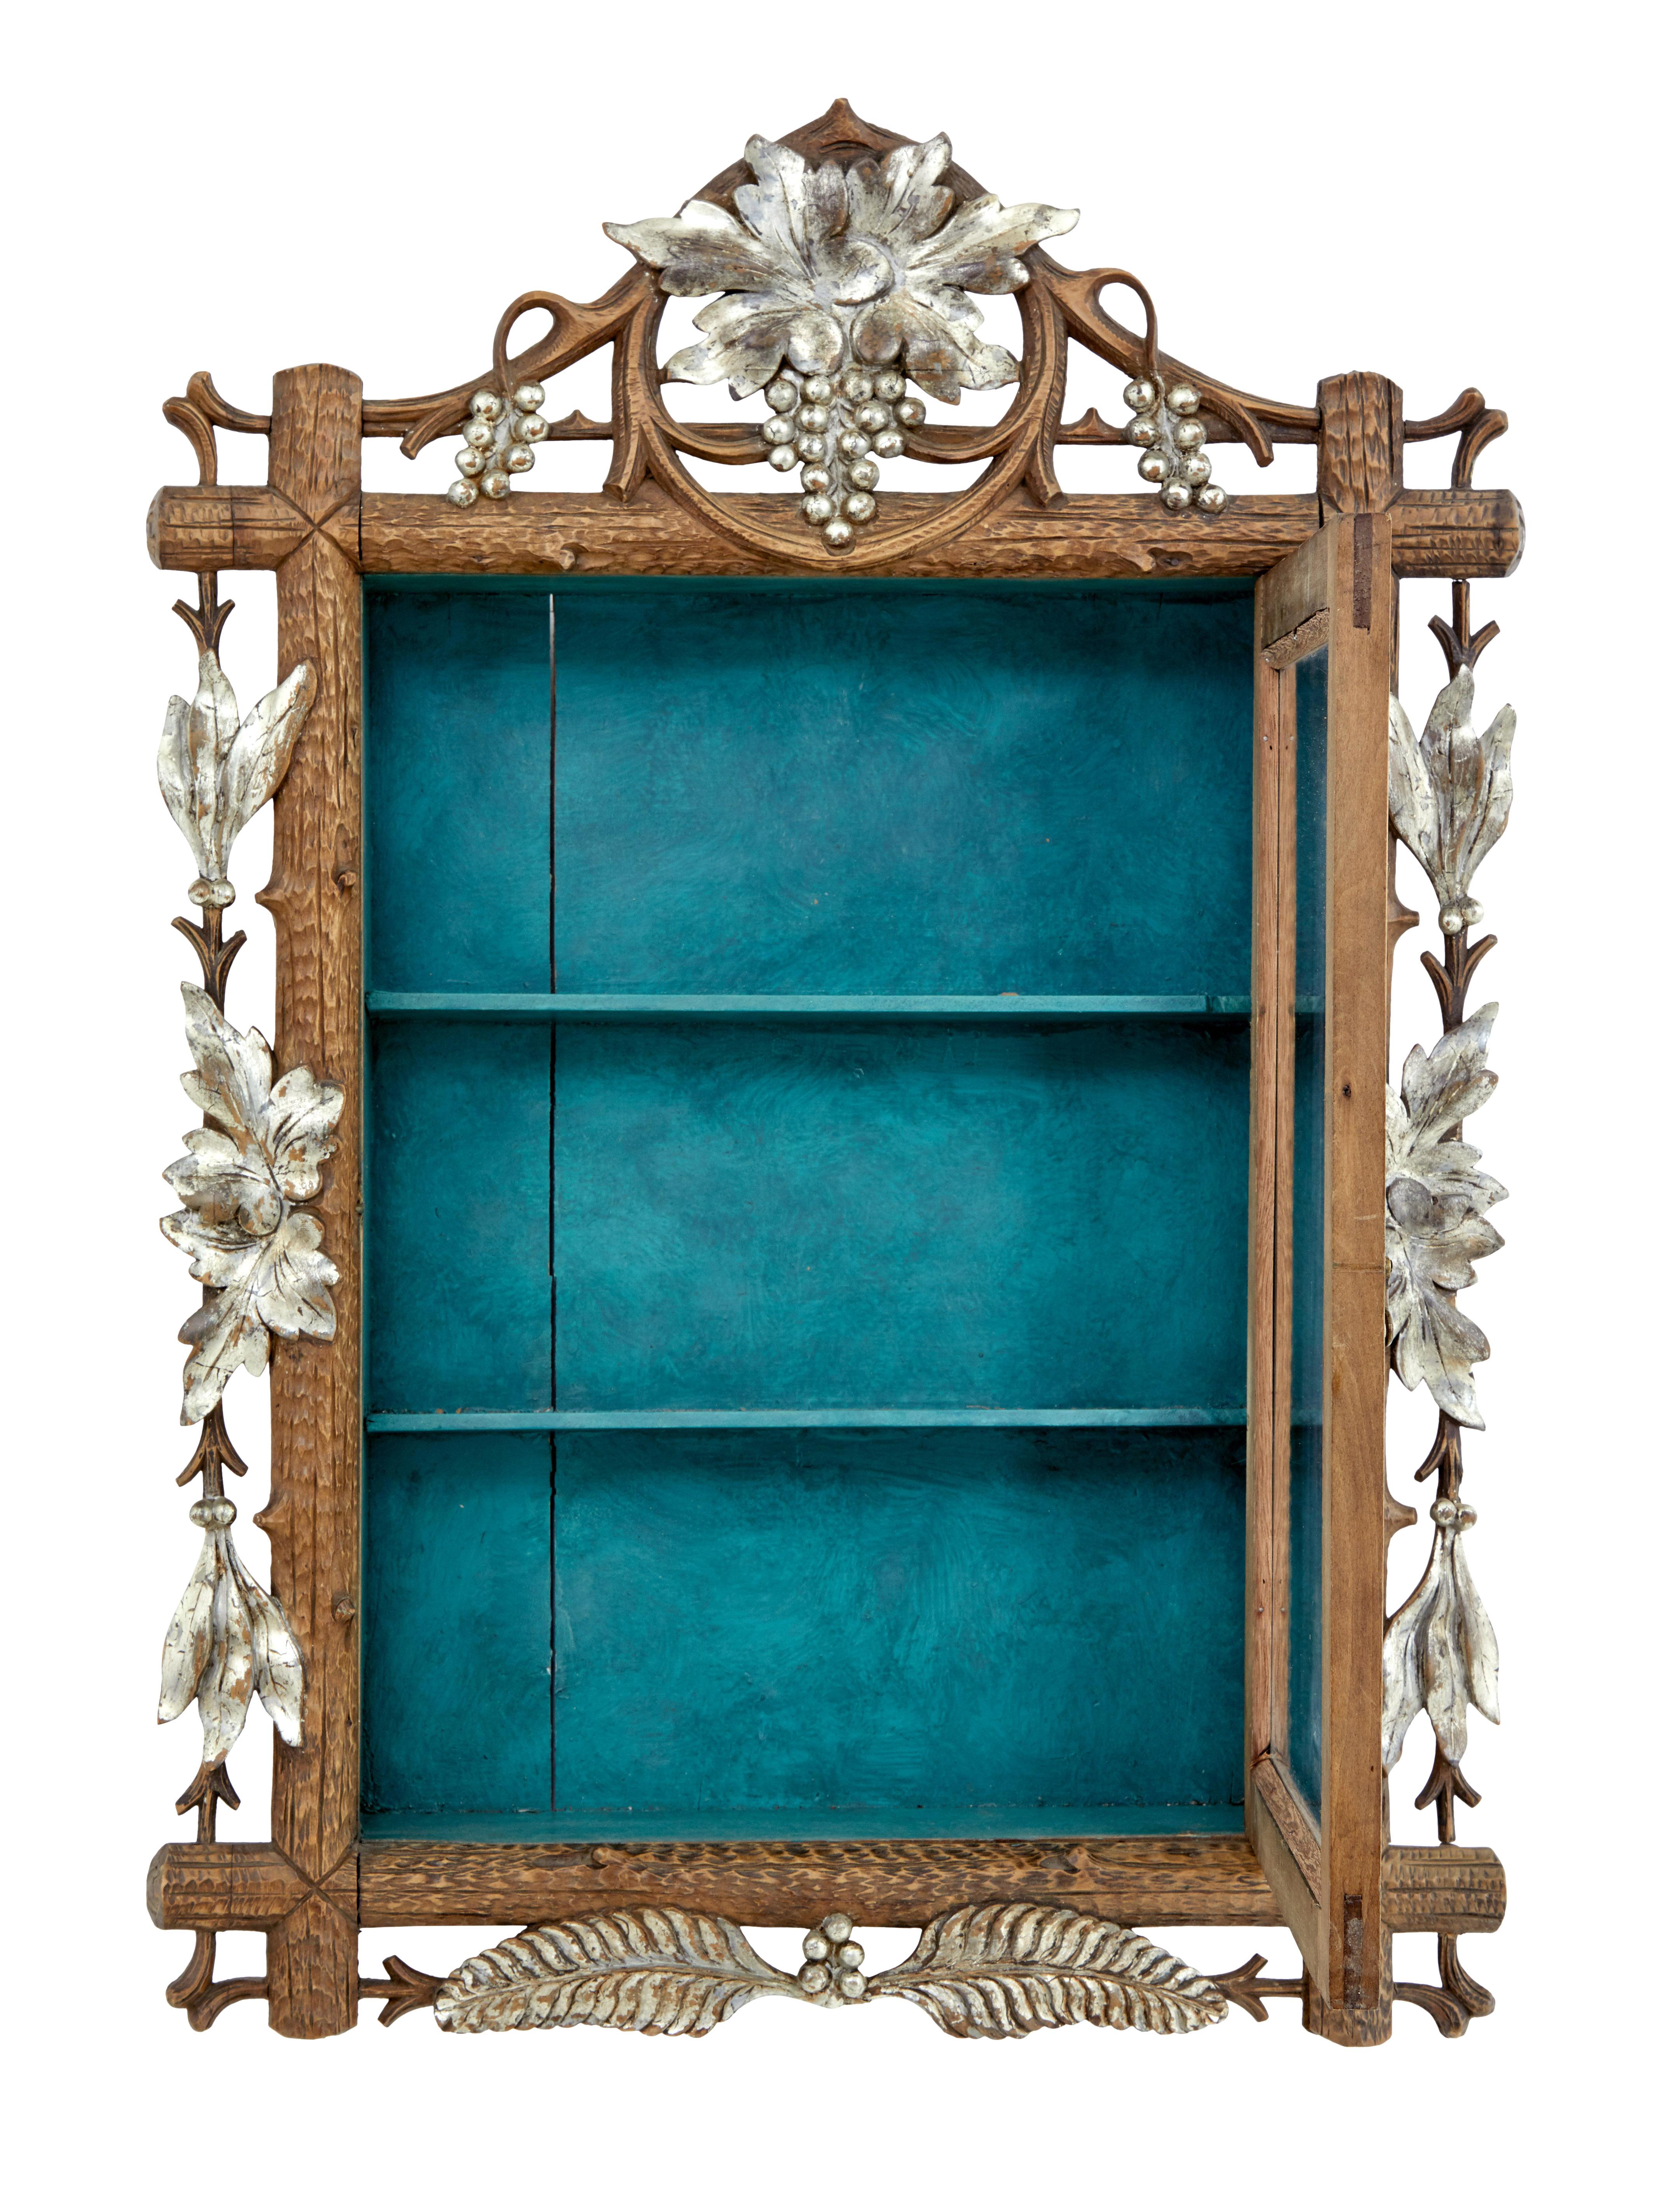 Late 19th century small Black Forest display cabinet, circa 1890.

Good quality small display hanging display cabinet made from linden wood, with silver gilt elements. Single glazed door which opens to a painted interior containing 2 narrow